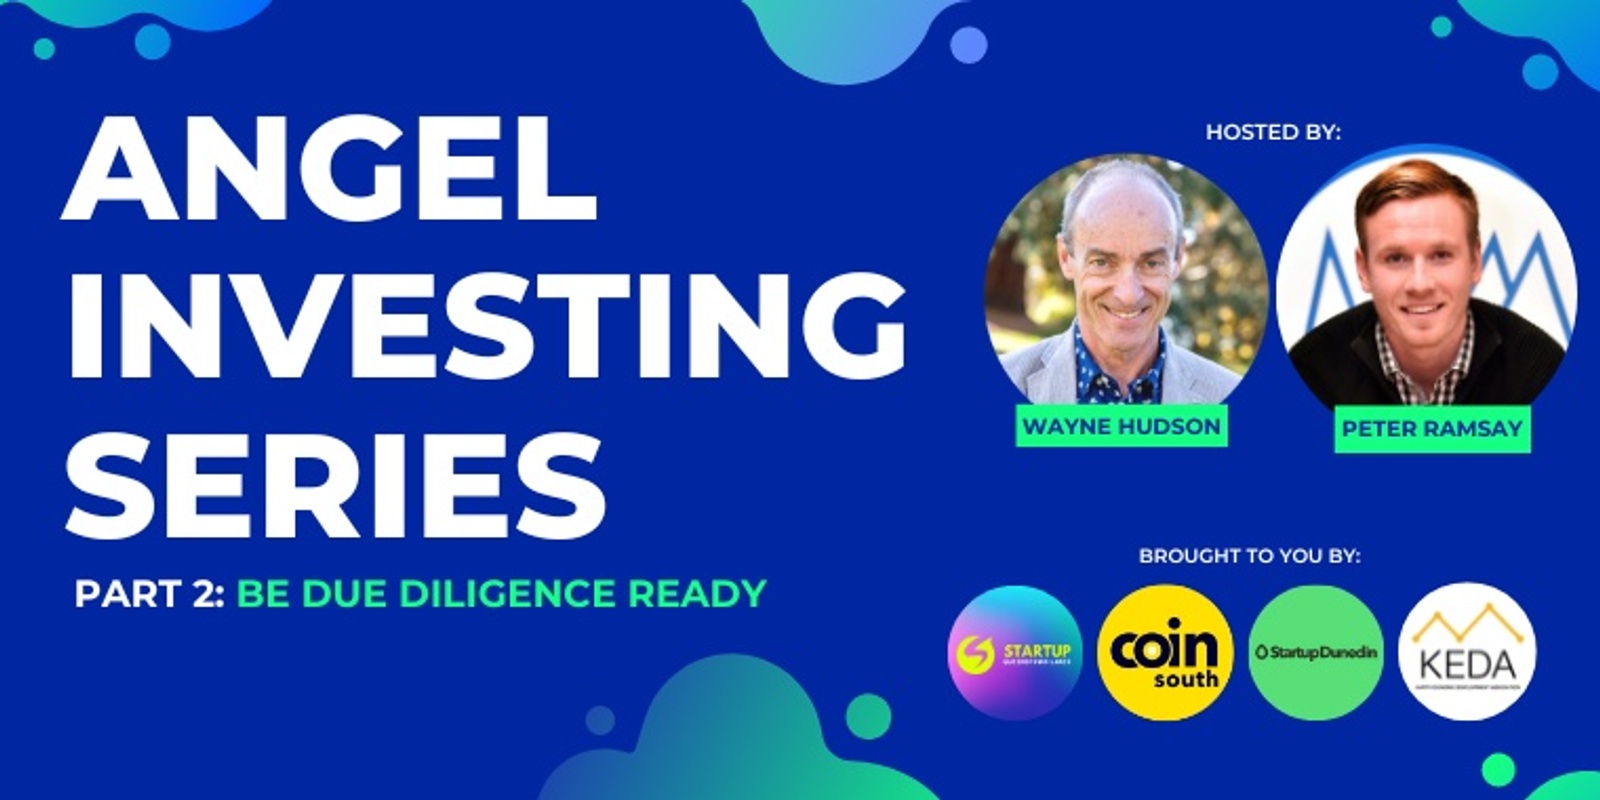 Banner image for ANGEL INVESTING SERIES: Part 2 - Be Due Diligence Ready